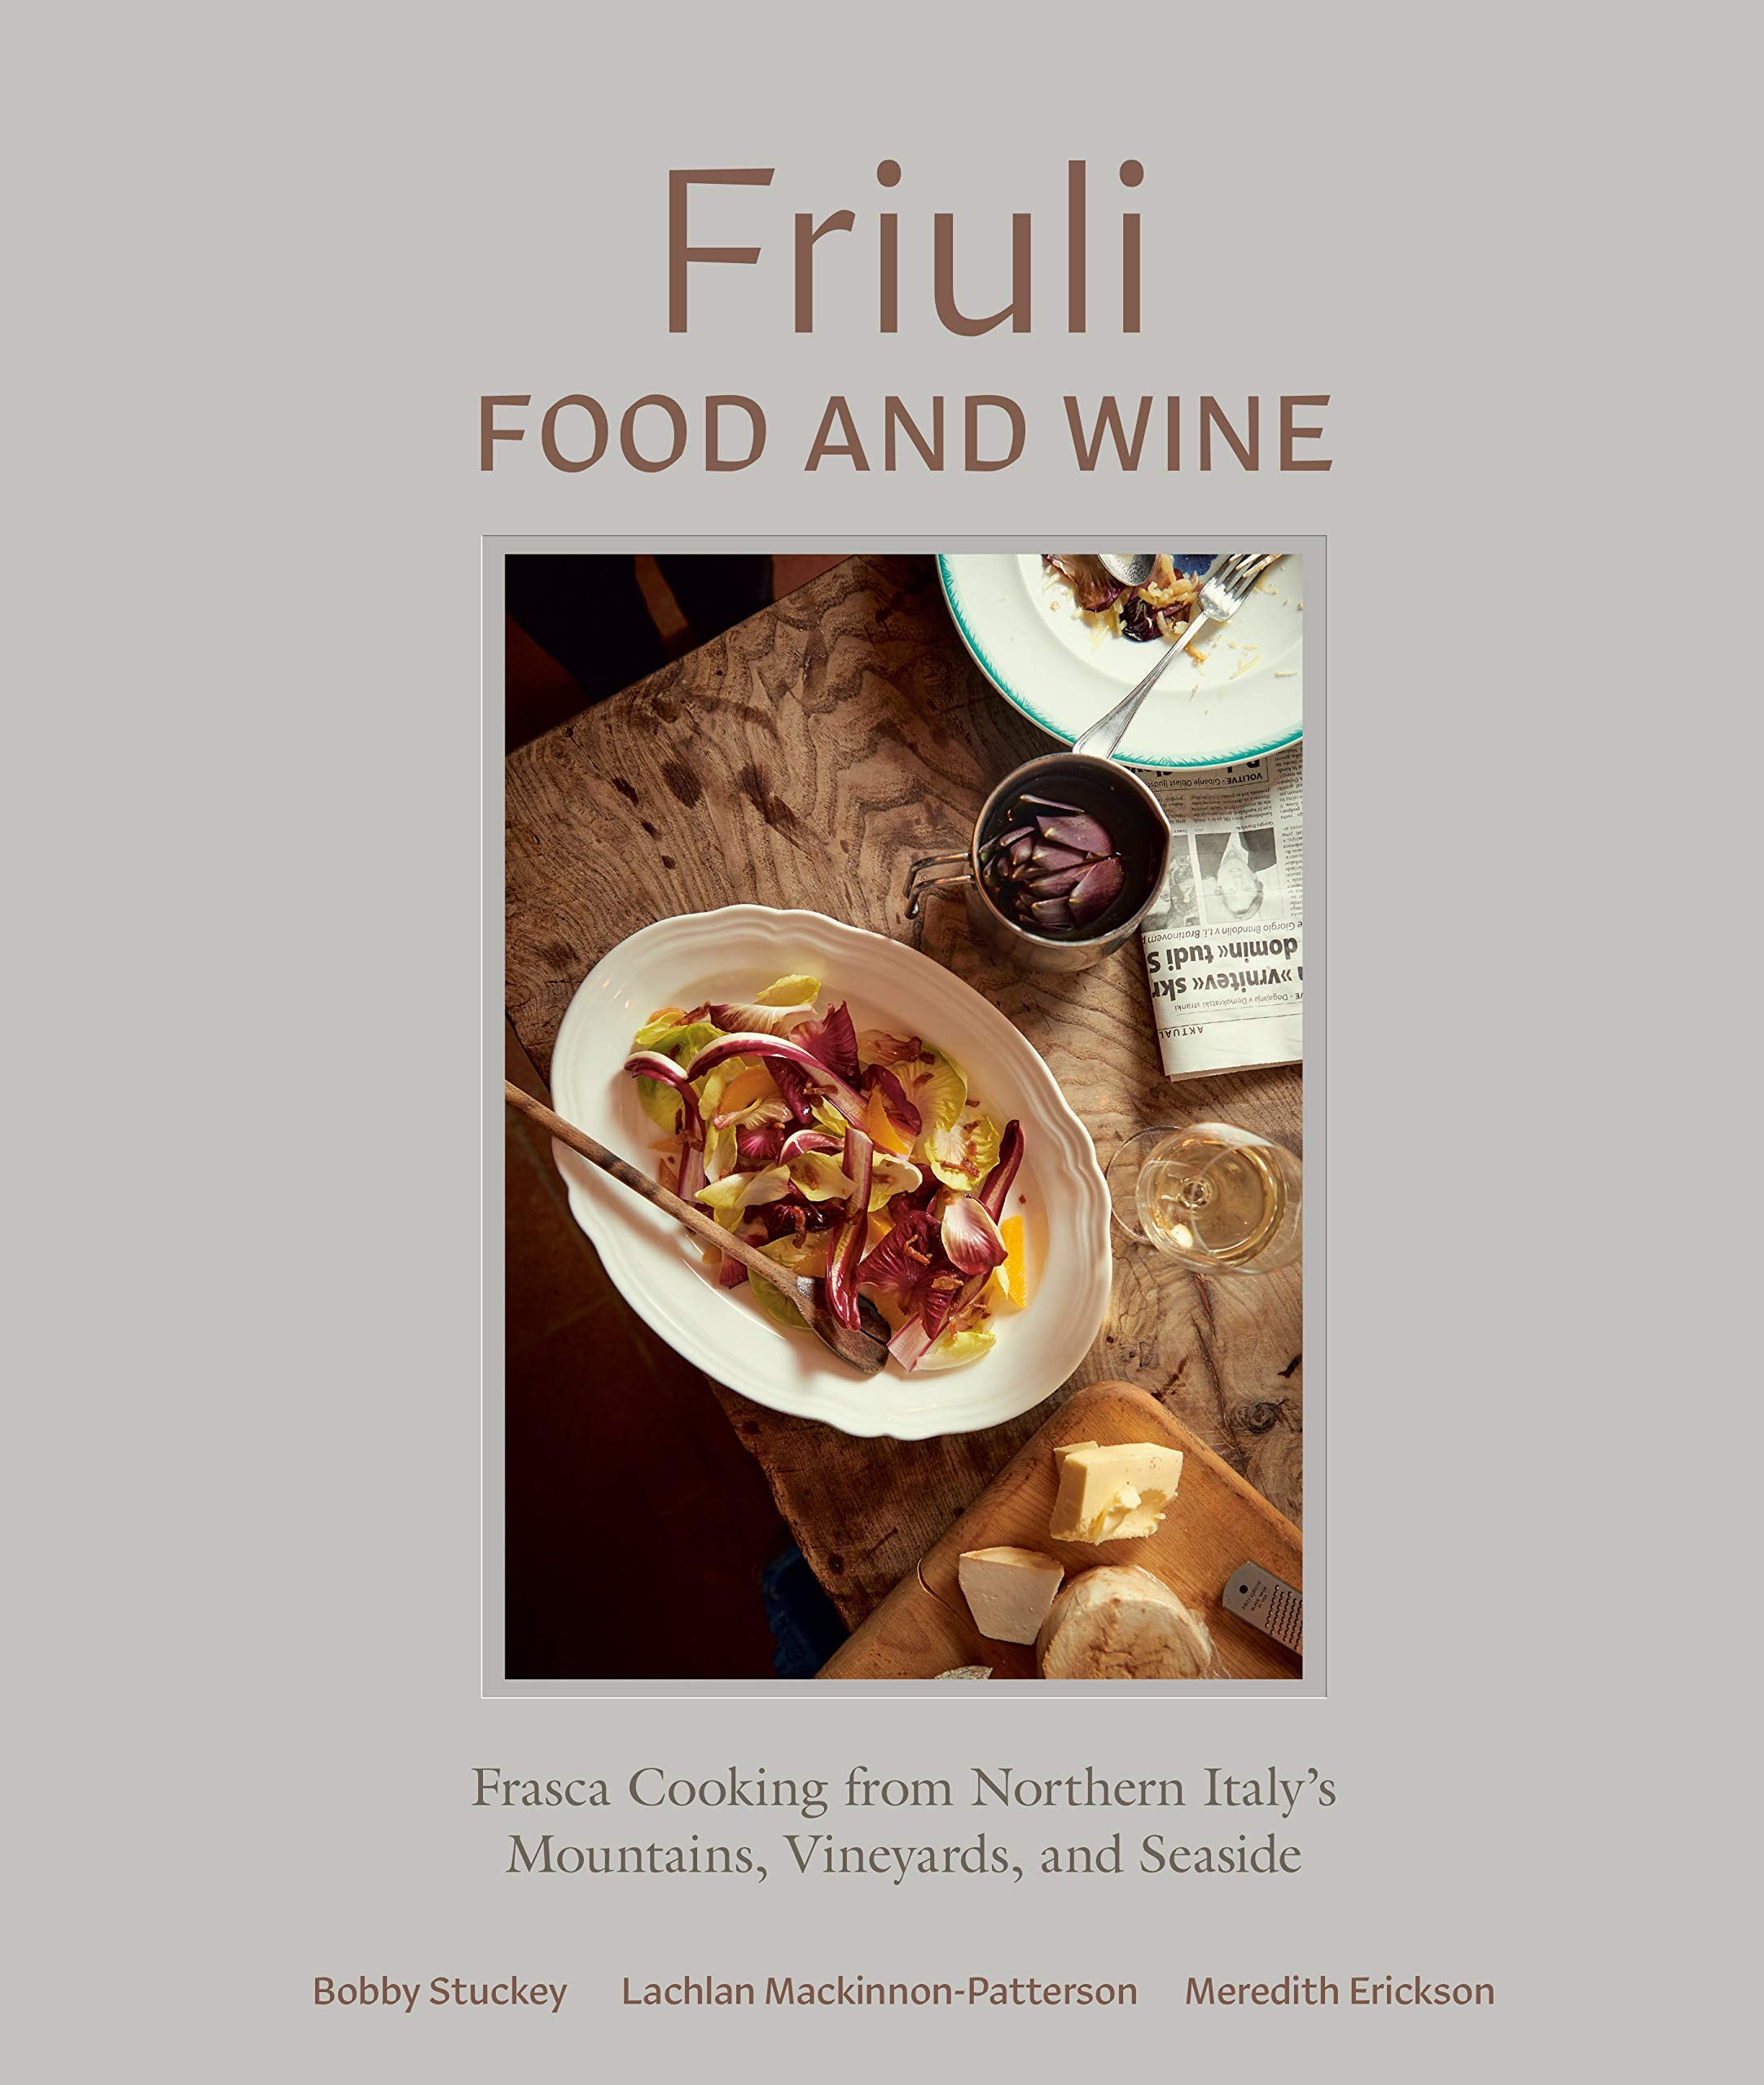 Friuli Food and Wine: Frasca Cooking from Northern Italy's Mountains, Vineyards, and Seaside (Bobby Stuckey, Lachlan Mackinnon-Patterson, et al)